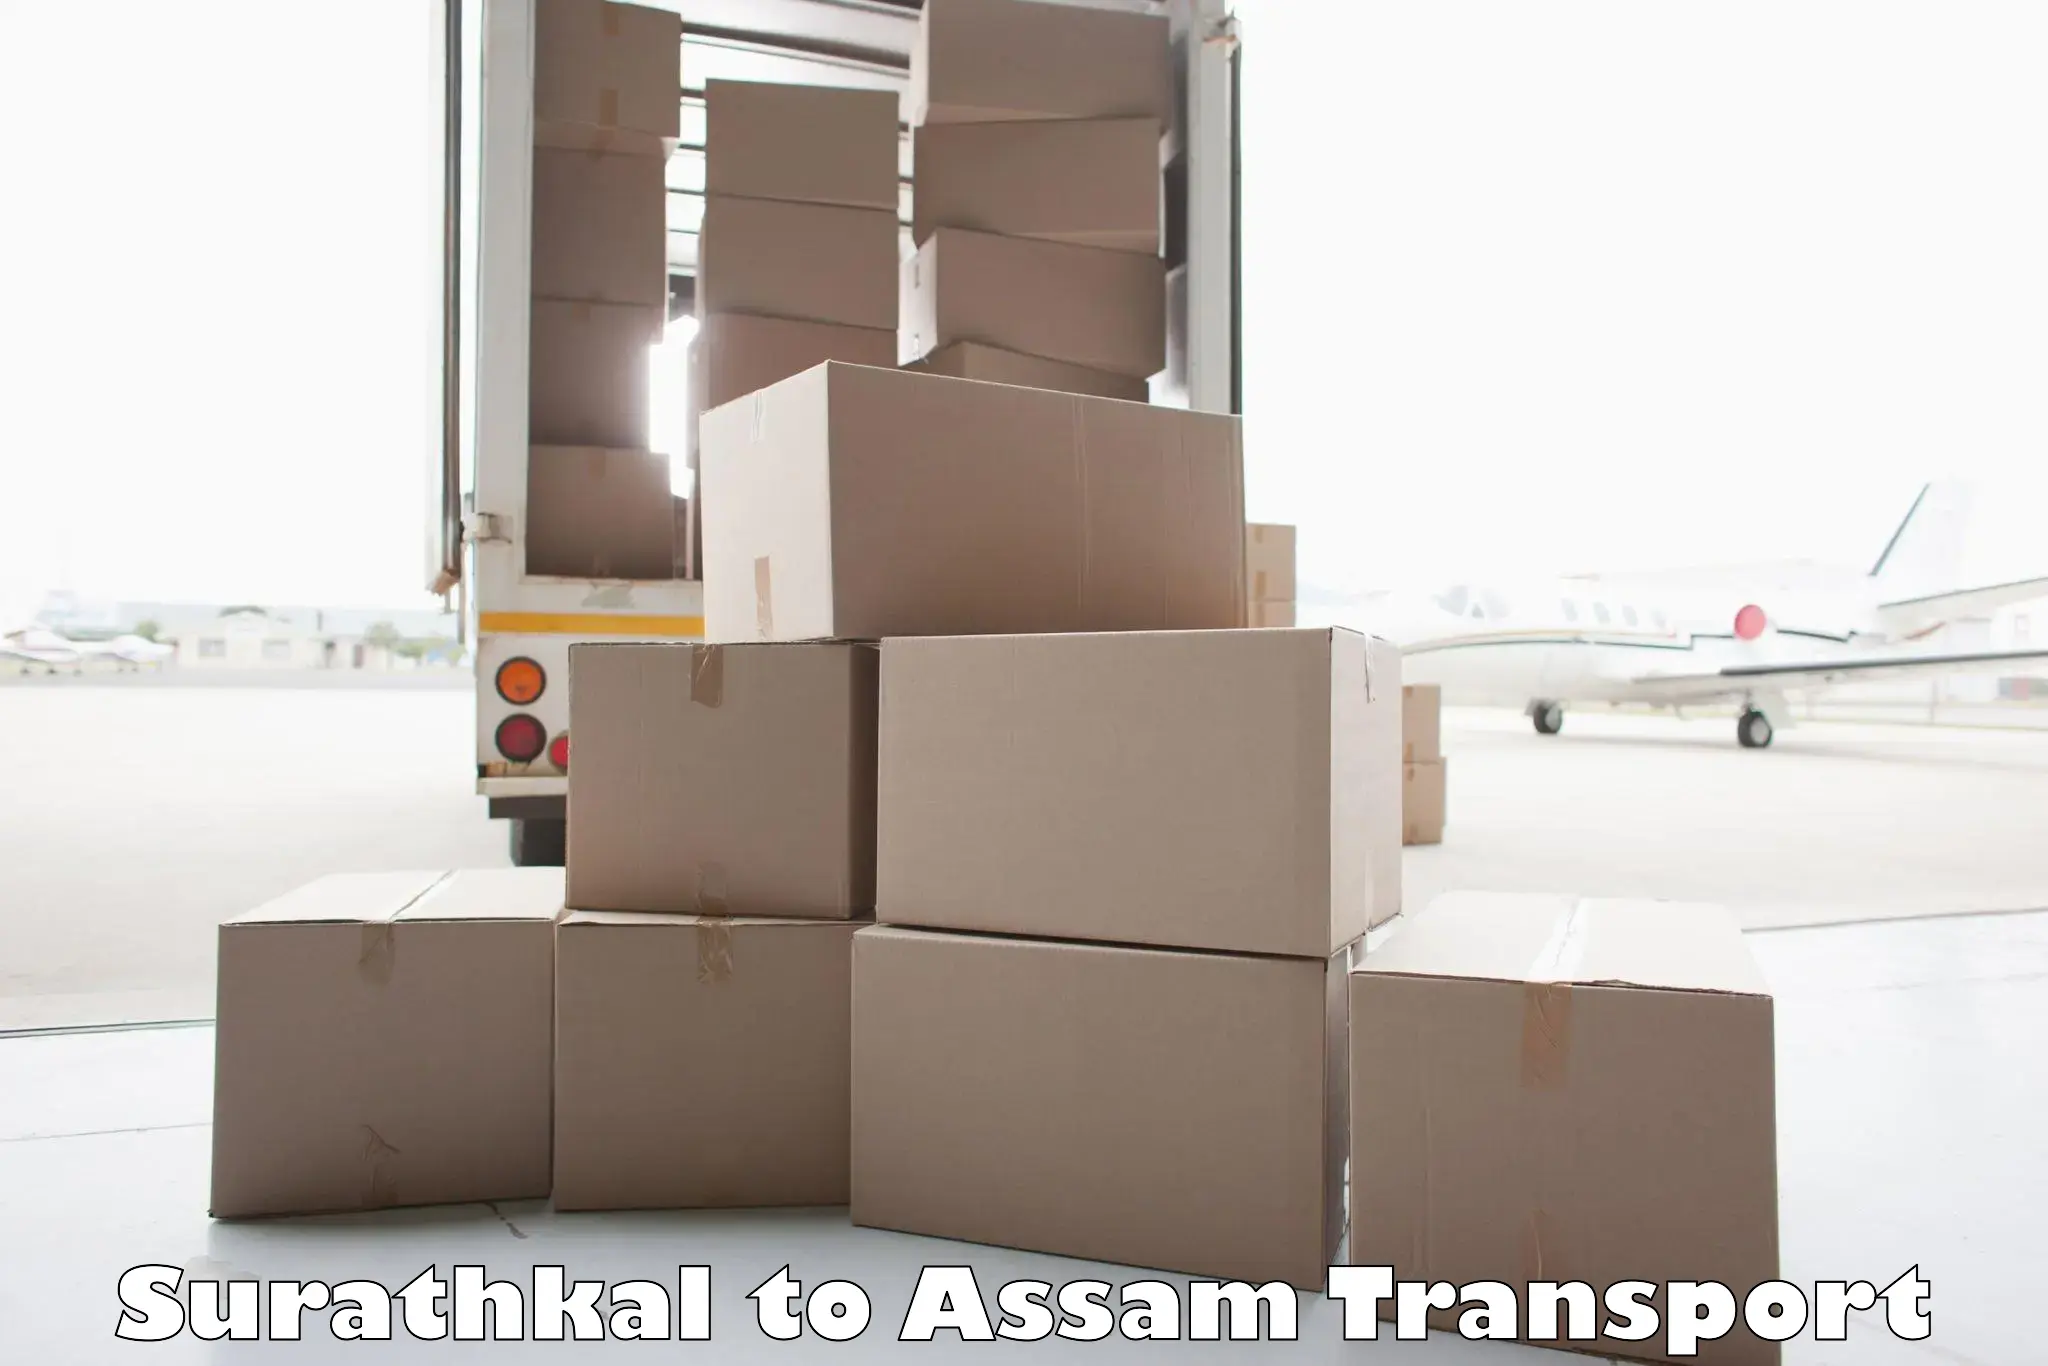 Express transport services in Surathkal to Bongaigaon